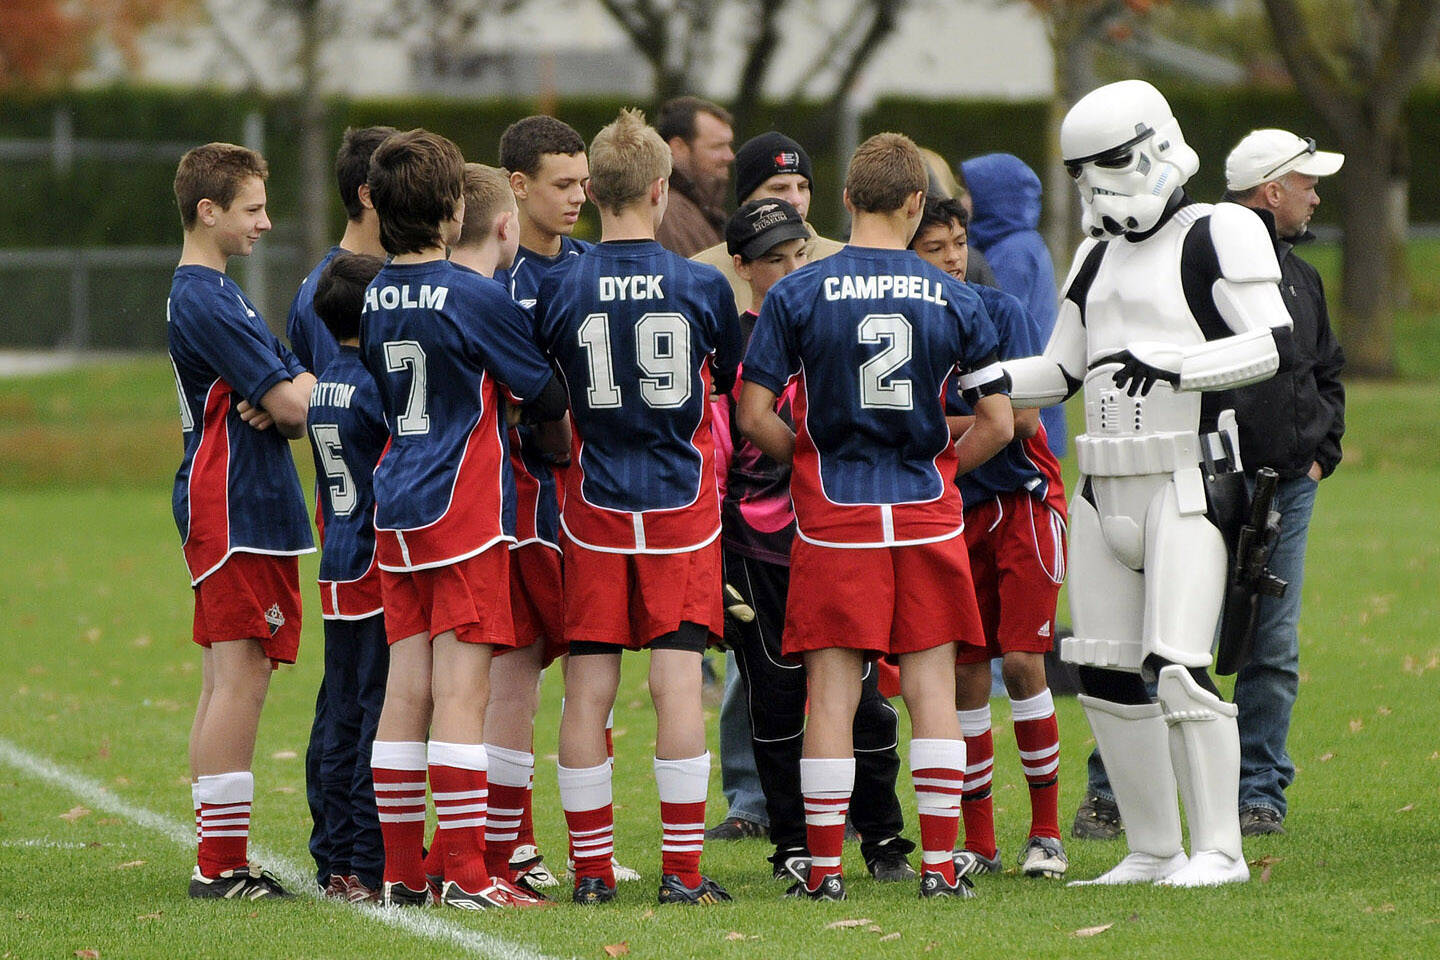 Coach Bob Fugger chats with his team while wearing a Star Wars stormtrooper costume during a game in Chilliwack on Oct. 31, 2009. May 4, 2022 is Star Wars Day. (Jenna Hauck/ Chilliwack Progress file)